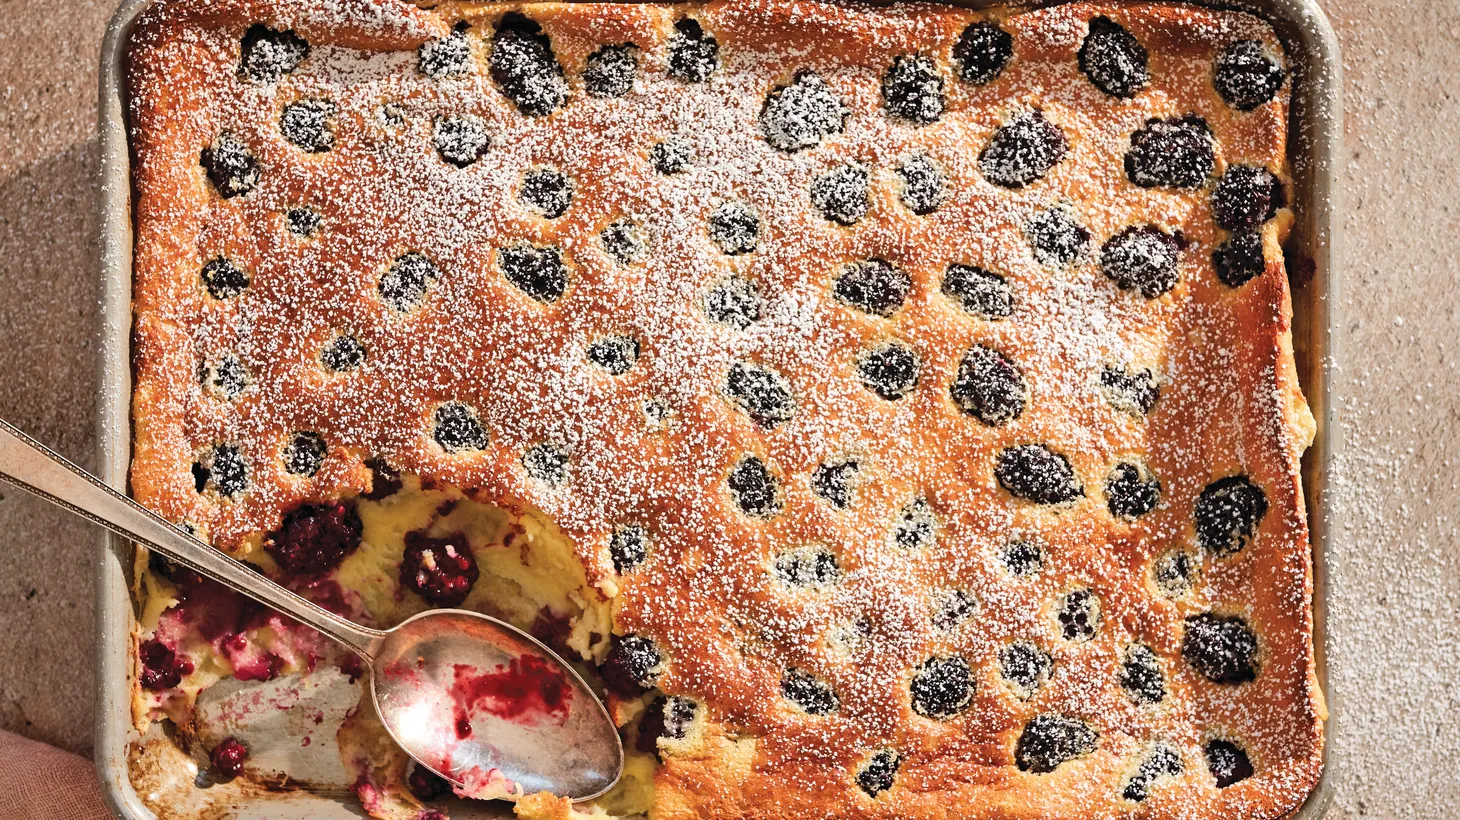 Blackberry-lemon clafoutis baked in a sheet pan makes for a quick and easy dessert.